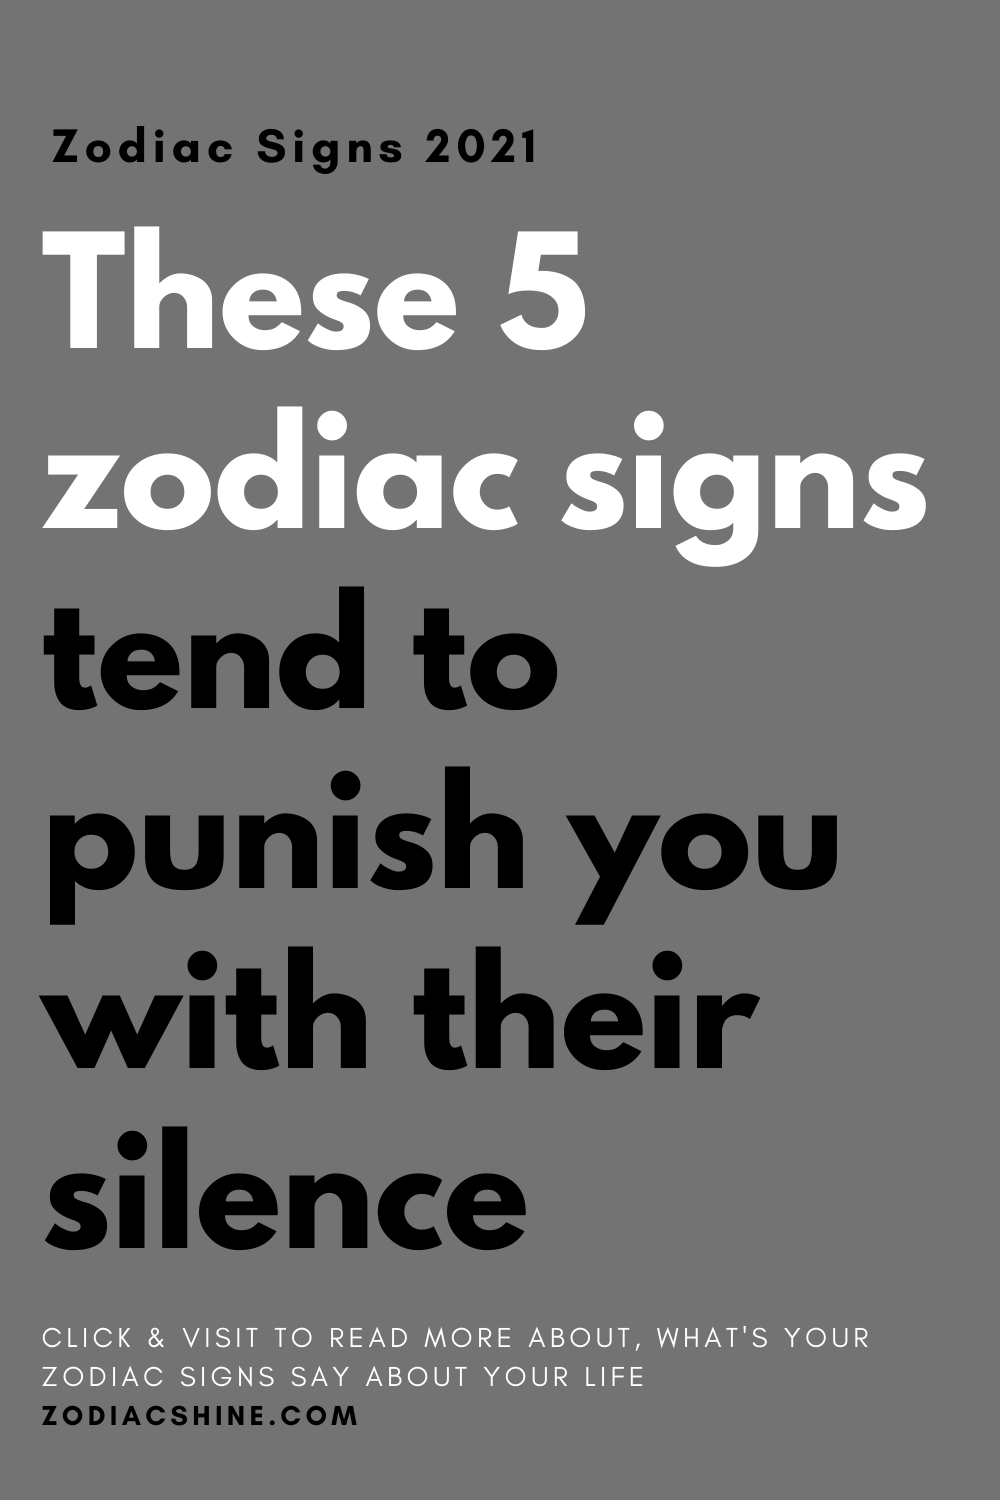 These 5 zodiac signs tend to punish you with their silence